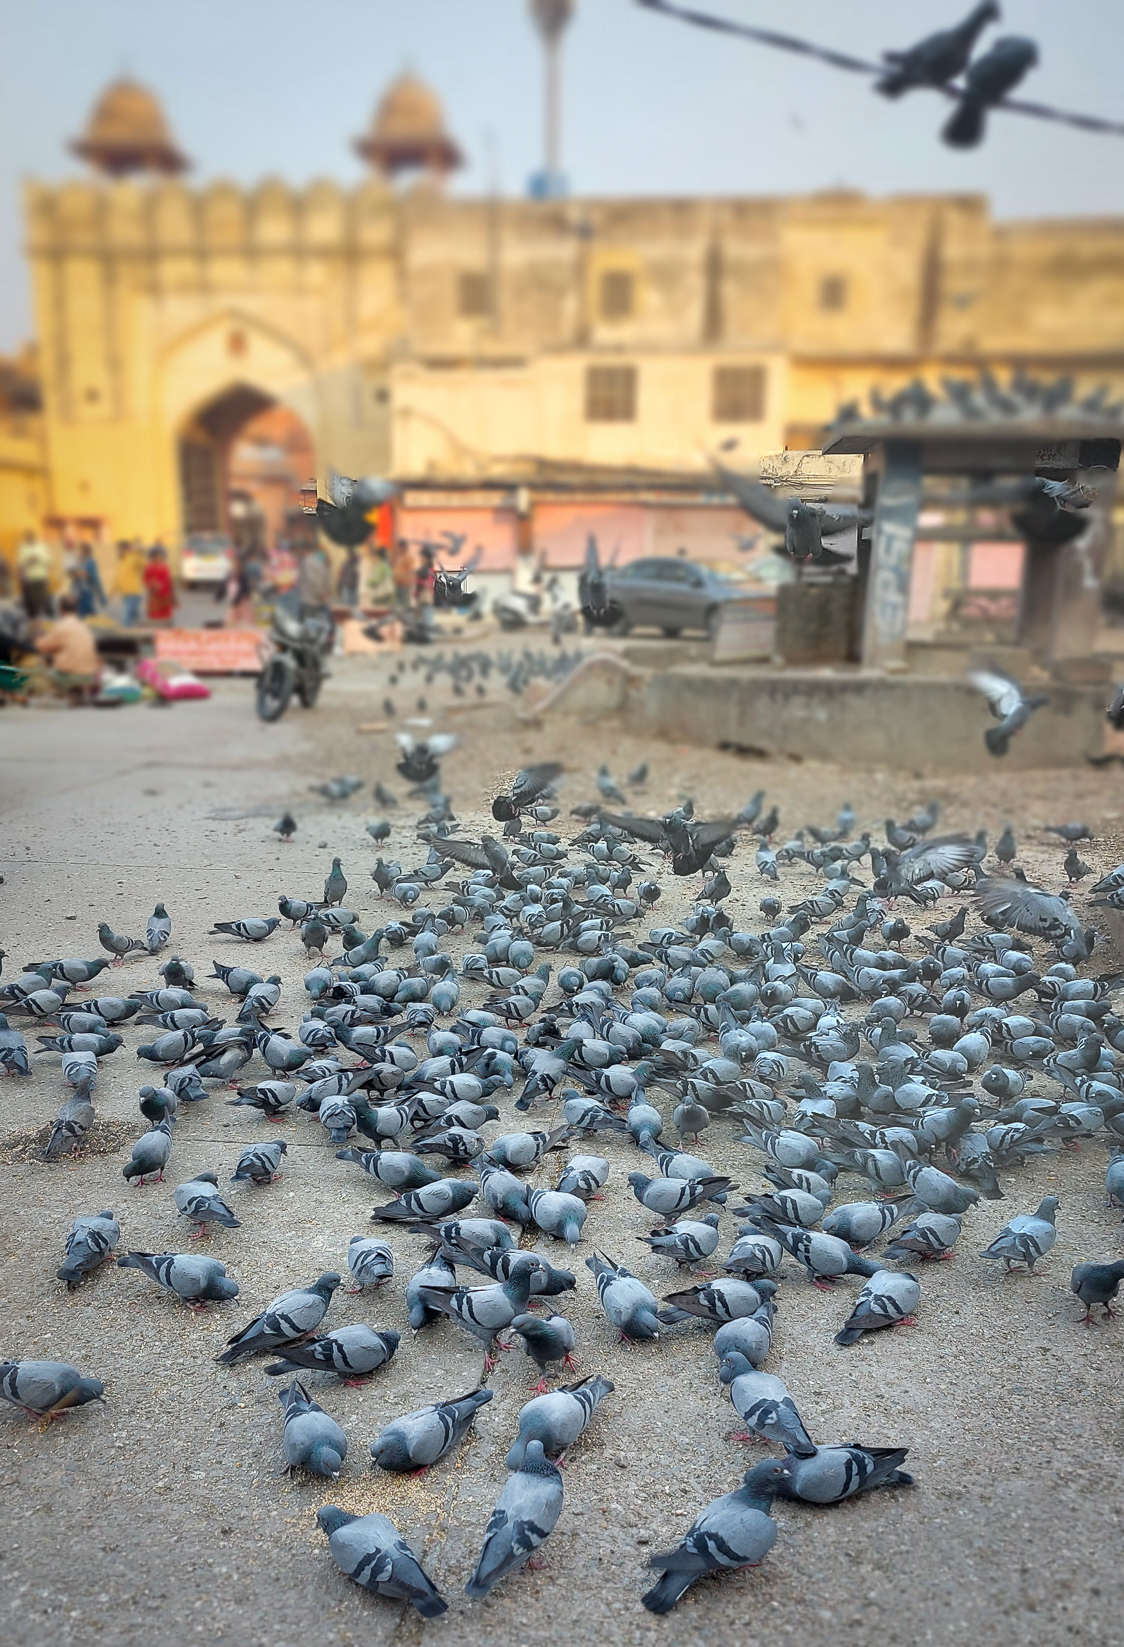 <span  class="uc_style_uc_tiles_grid_image_elementor_uc_items_attribute_title" style="color:#ffffff;">Pigeons: are welcome in India</span>